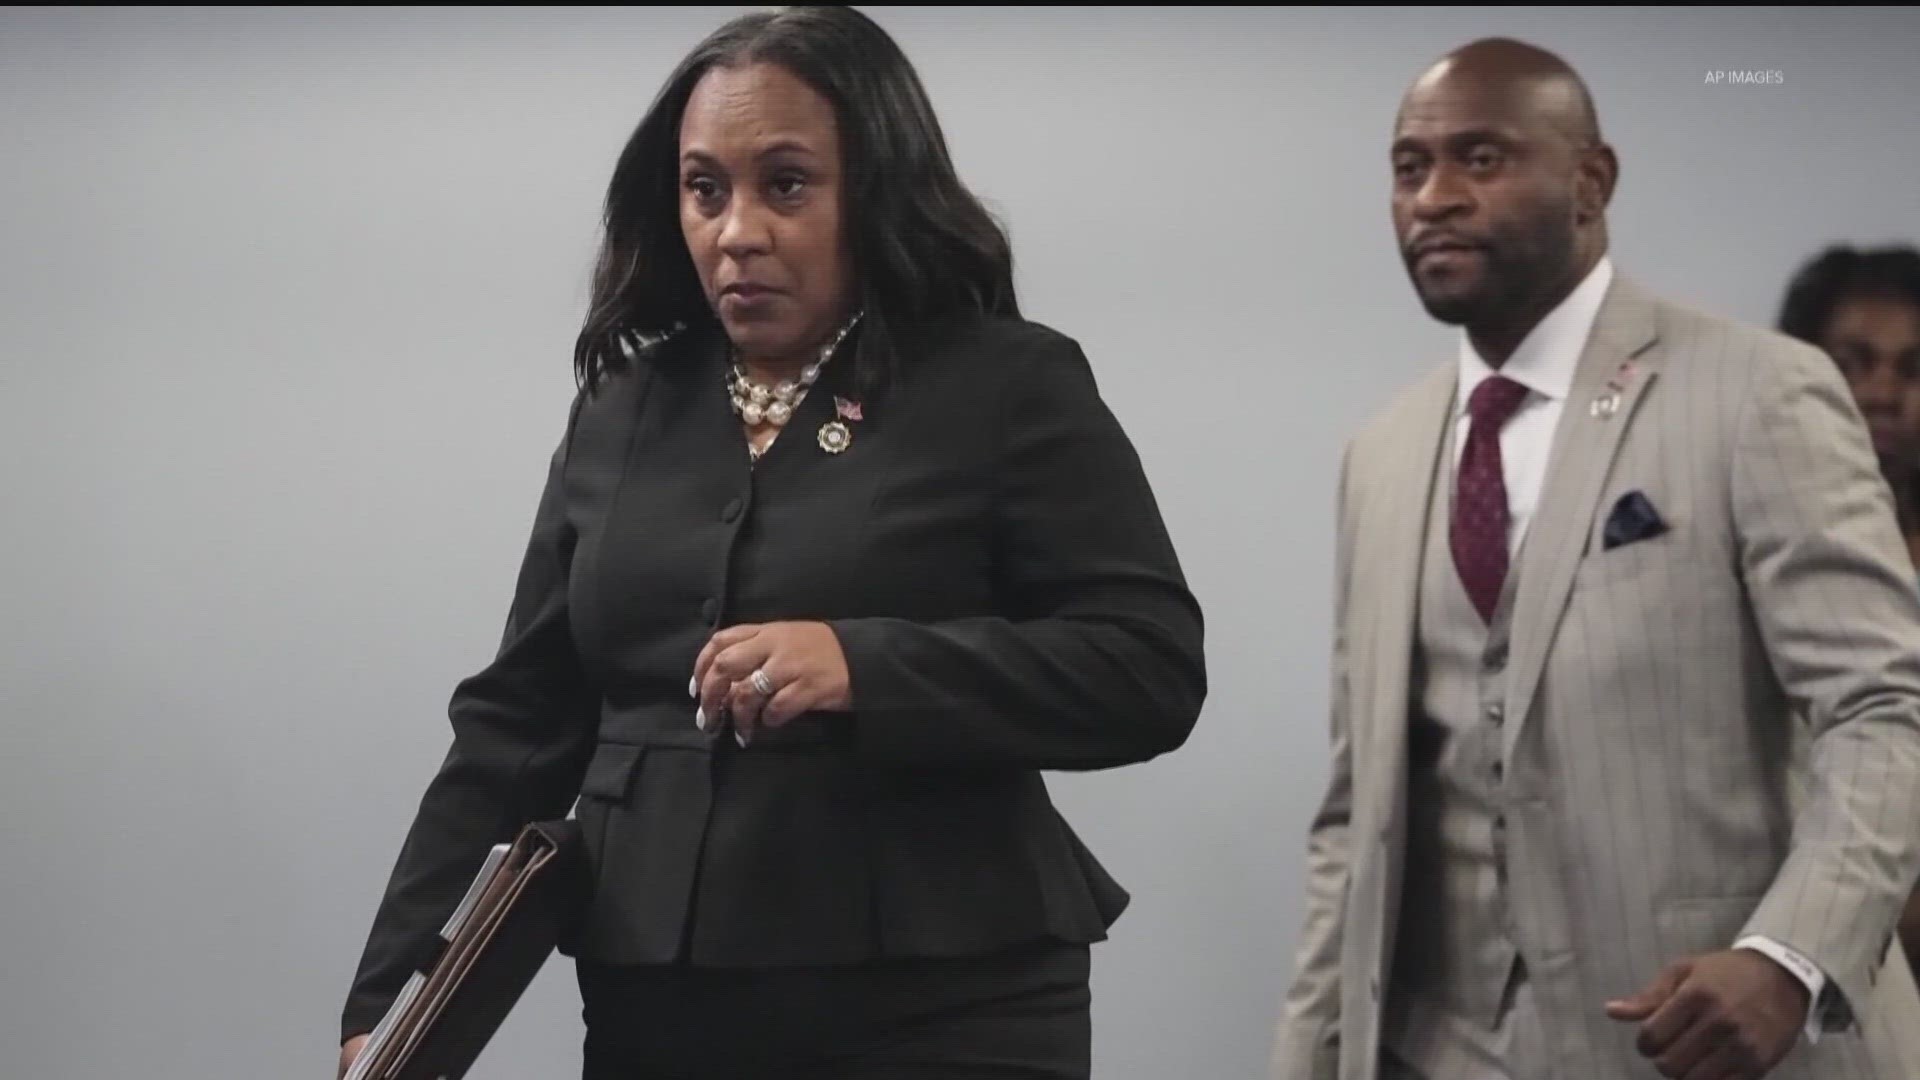 A major decision could be on the horizon in the ongoing disqualification controversy surrounding Fulton County District Attorney Fani Willis and Nathan Wade.